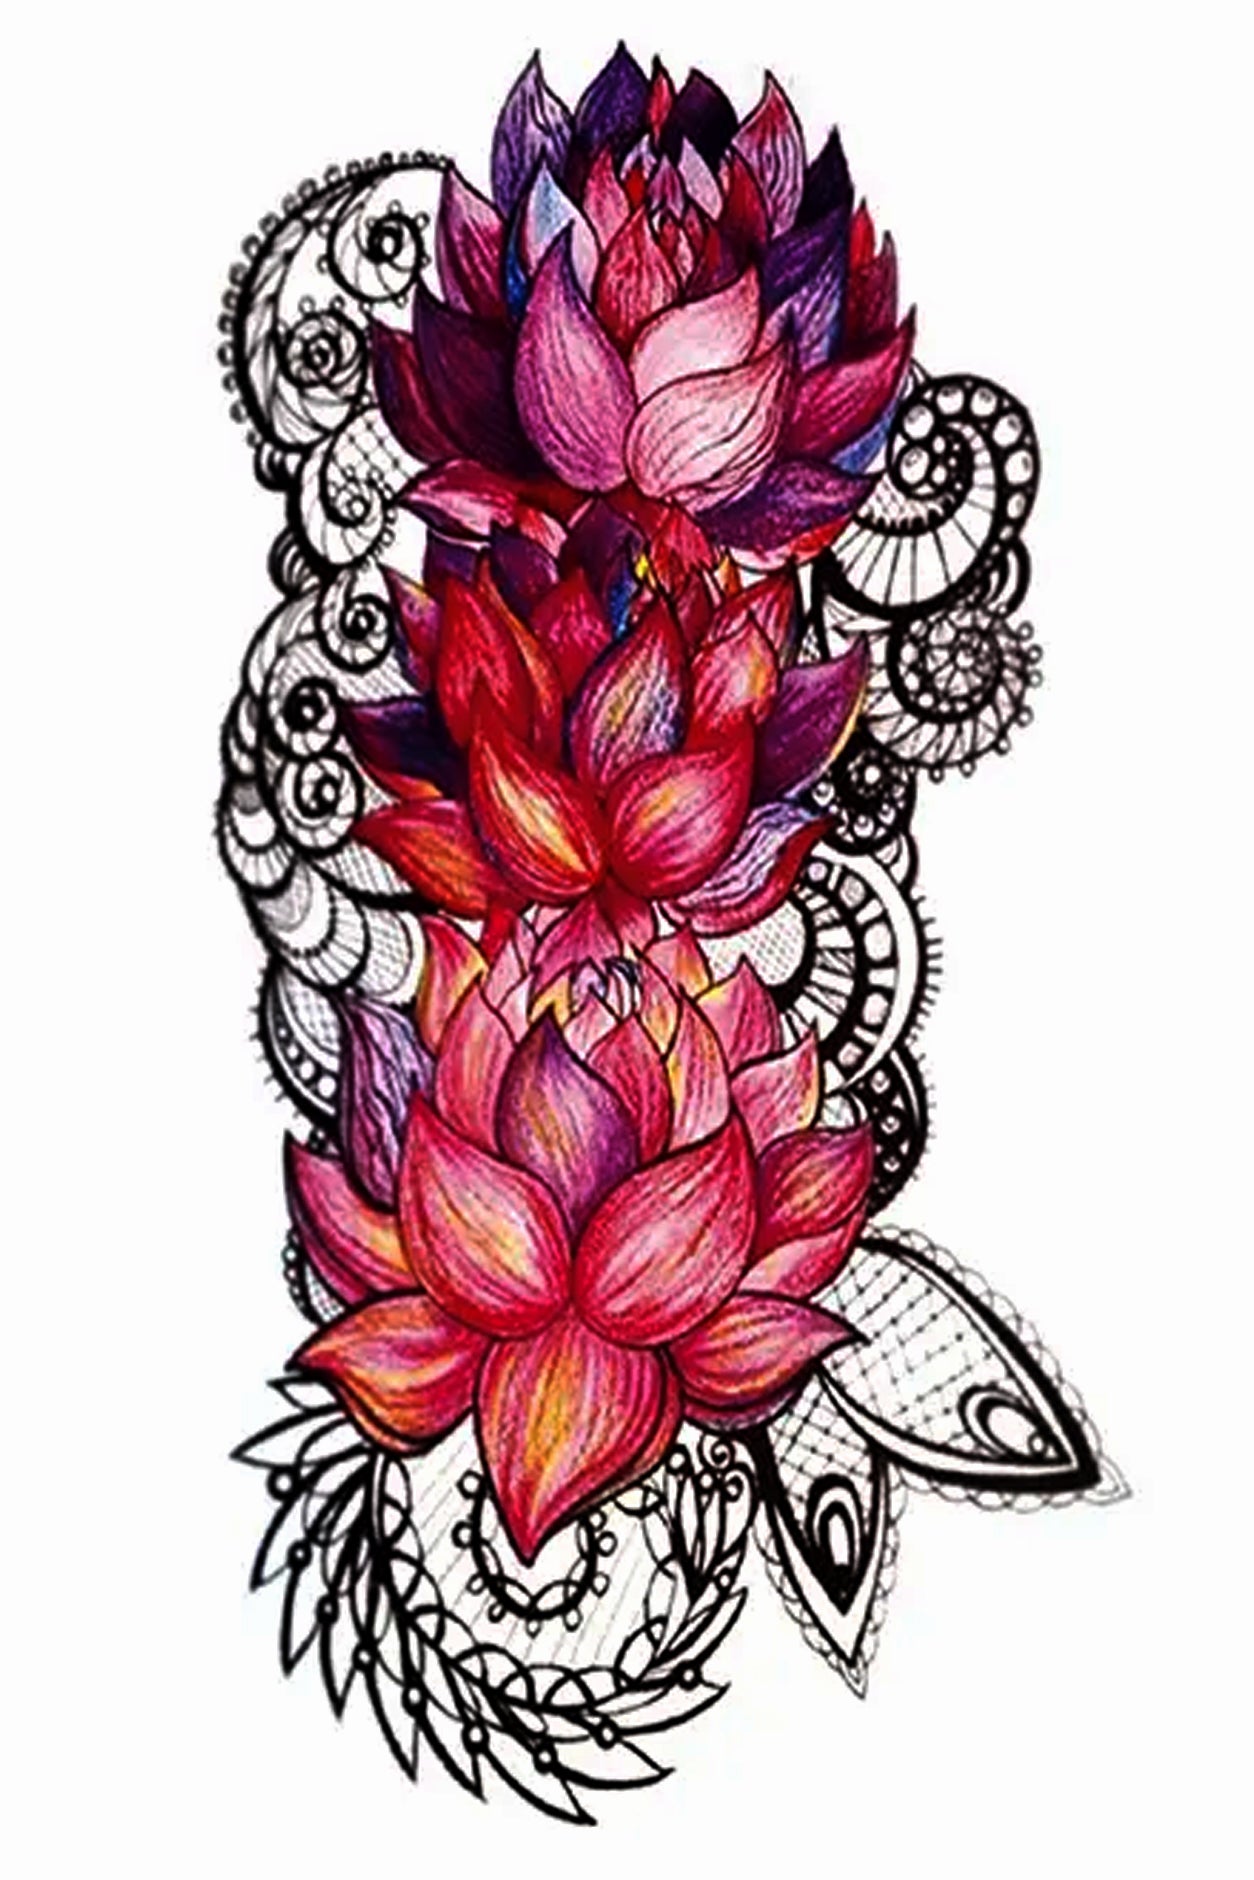 Lotus flowers represent power, tenacity, and rebirth because they emerge from the dark water each evening and bloom at dawn. They are intense flowers yet beautiful and delicate at the same time. The nesting of delicate circling of lace under the flowers combines the long life of this powerful organization of strength and beauty.  Creatively wear this artwork on any part of your body, arm, leg, torso, or shoulder.